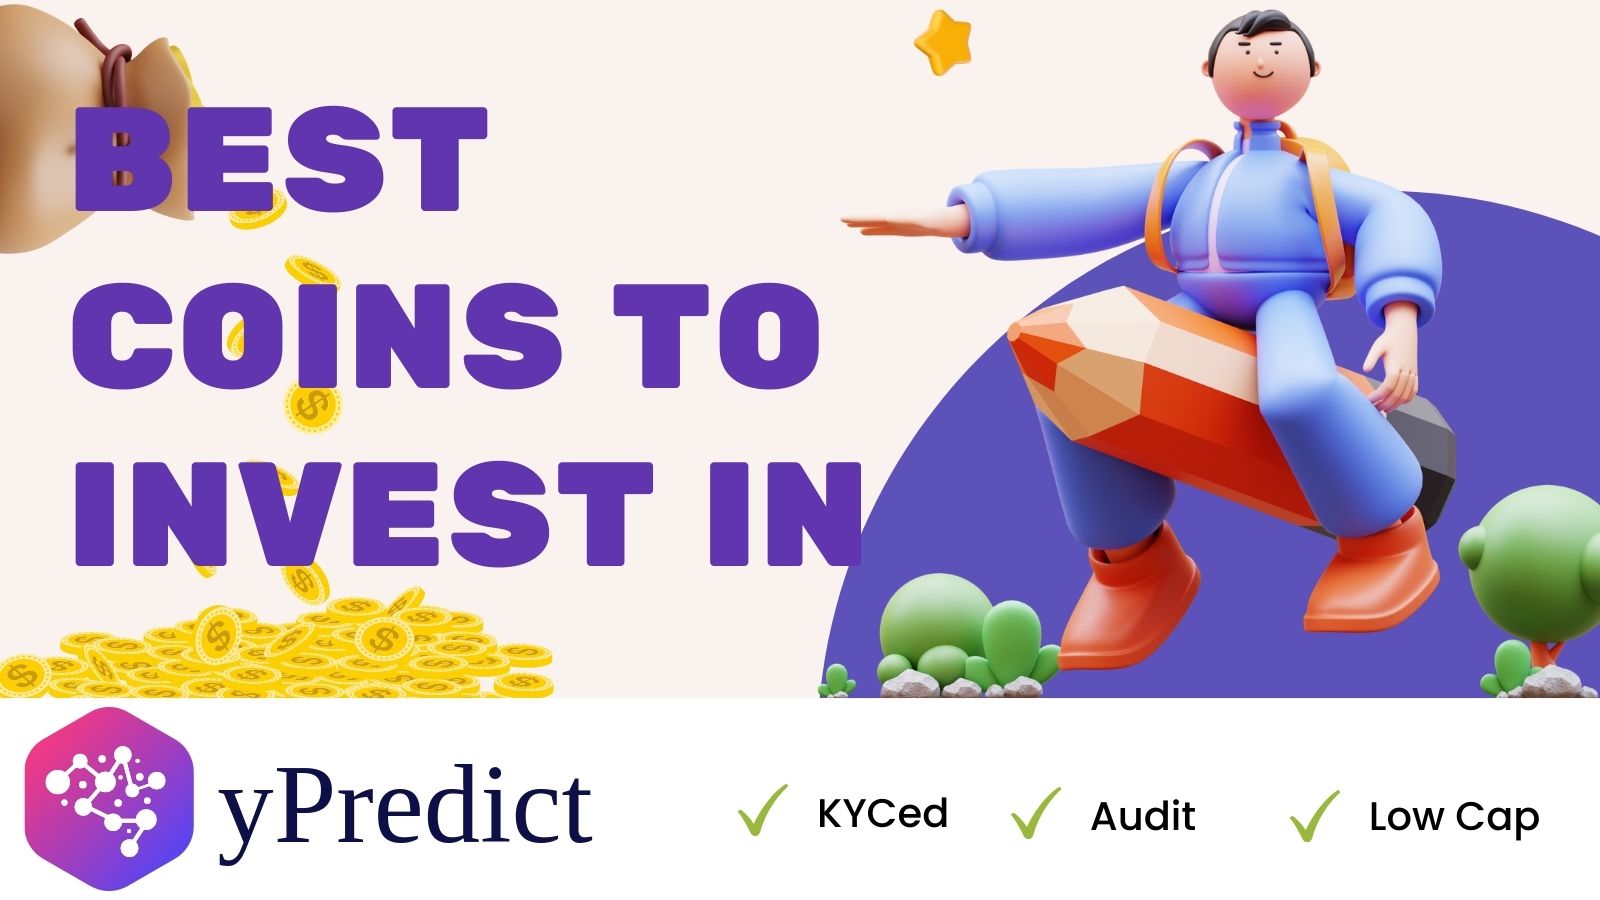 5 Best Coins to Invest in for 2023